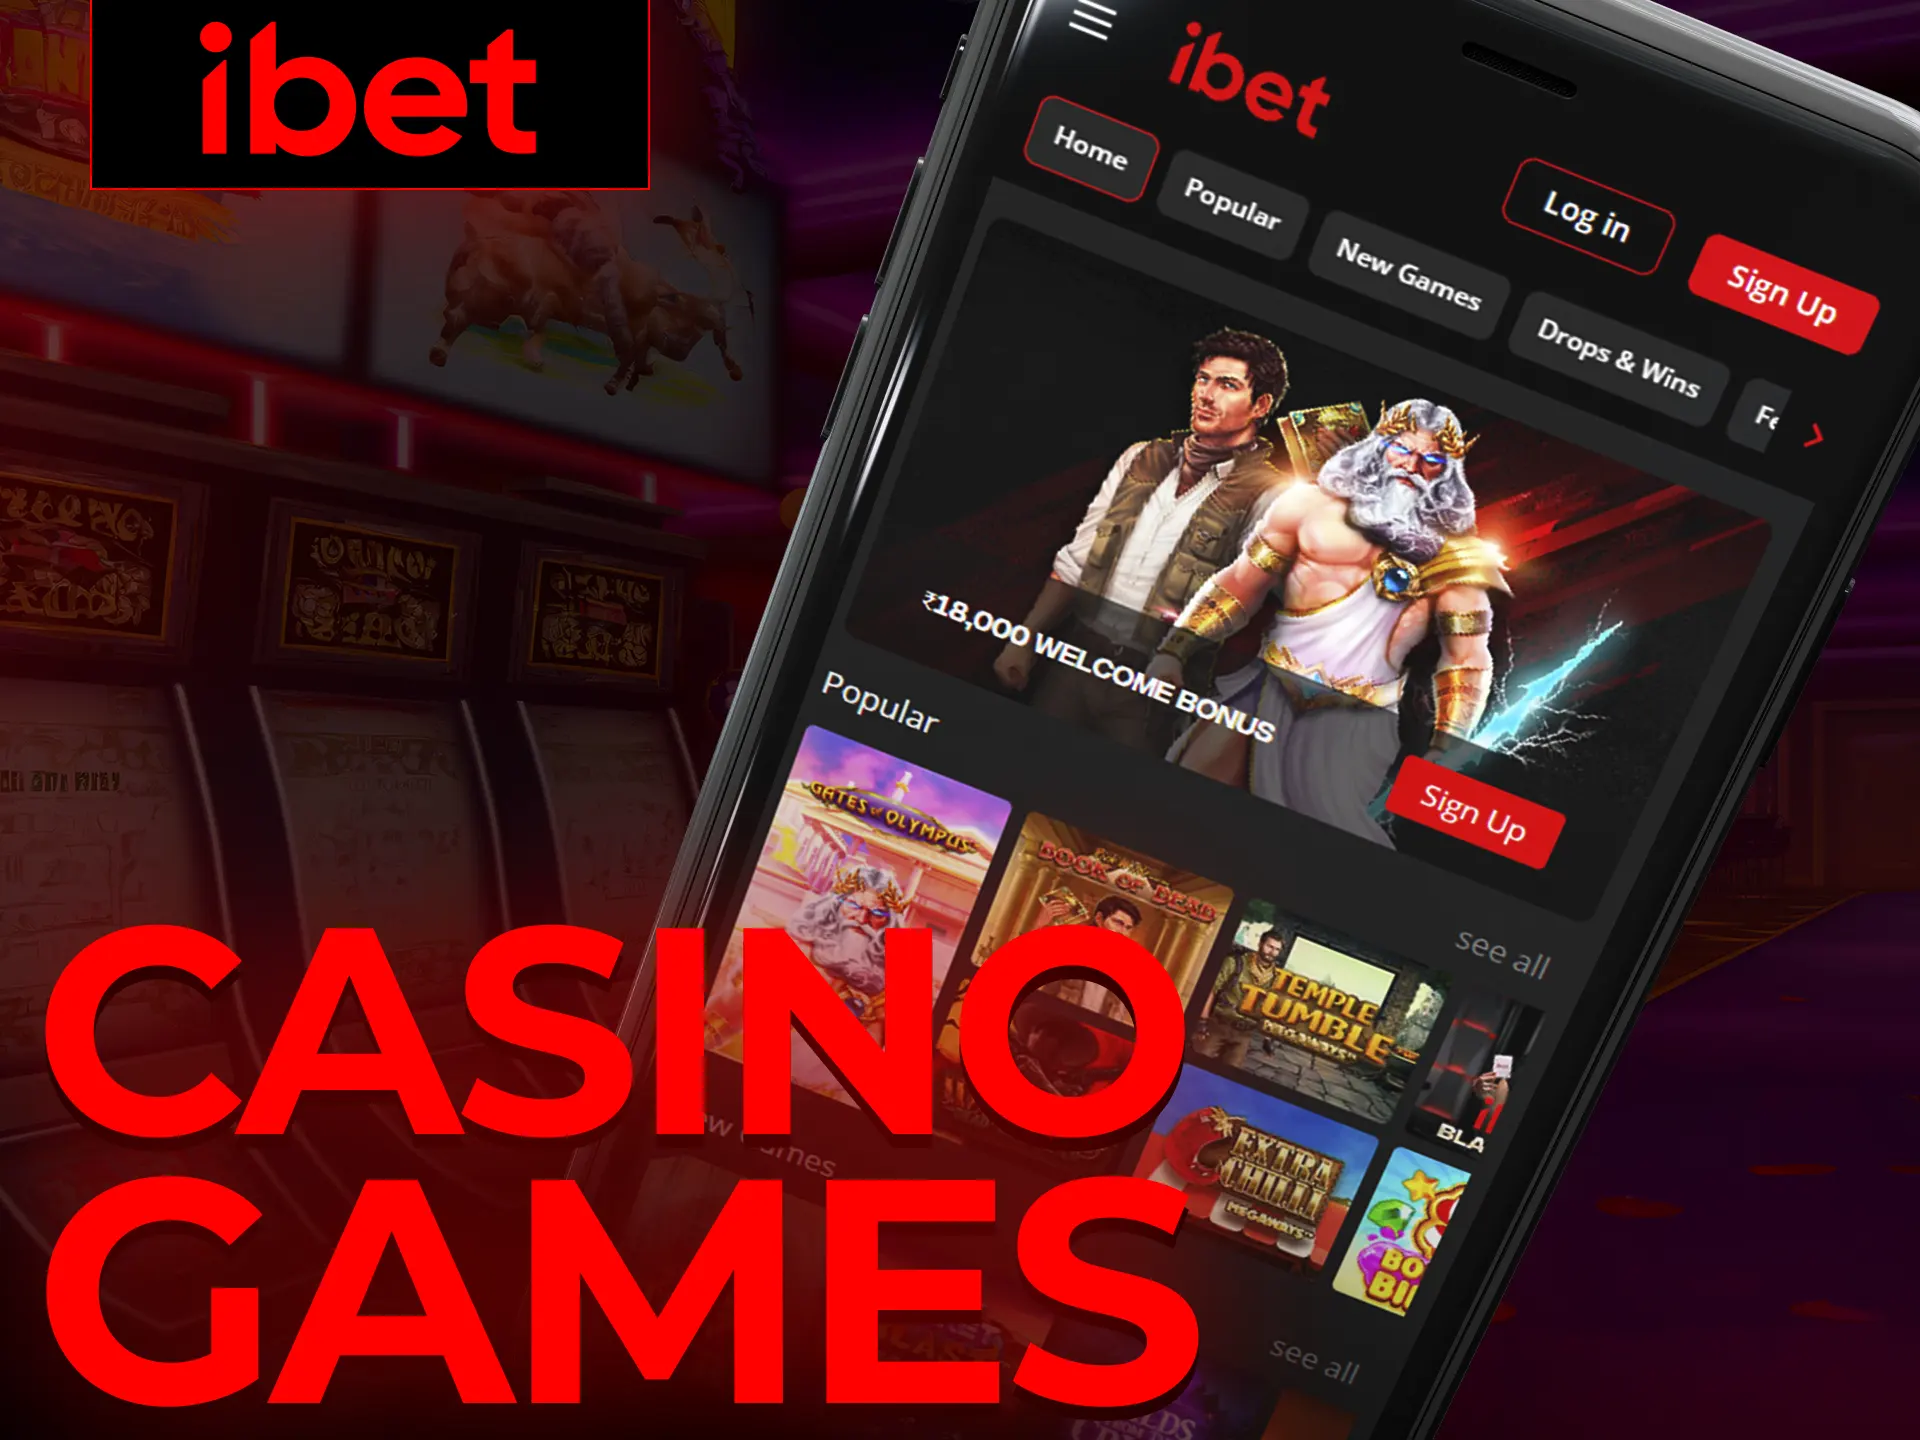 Check out the best iBet online casino games.